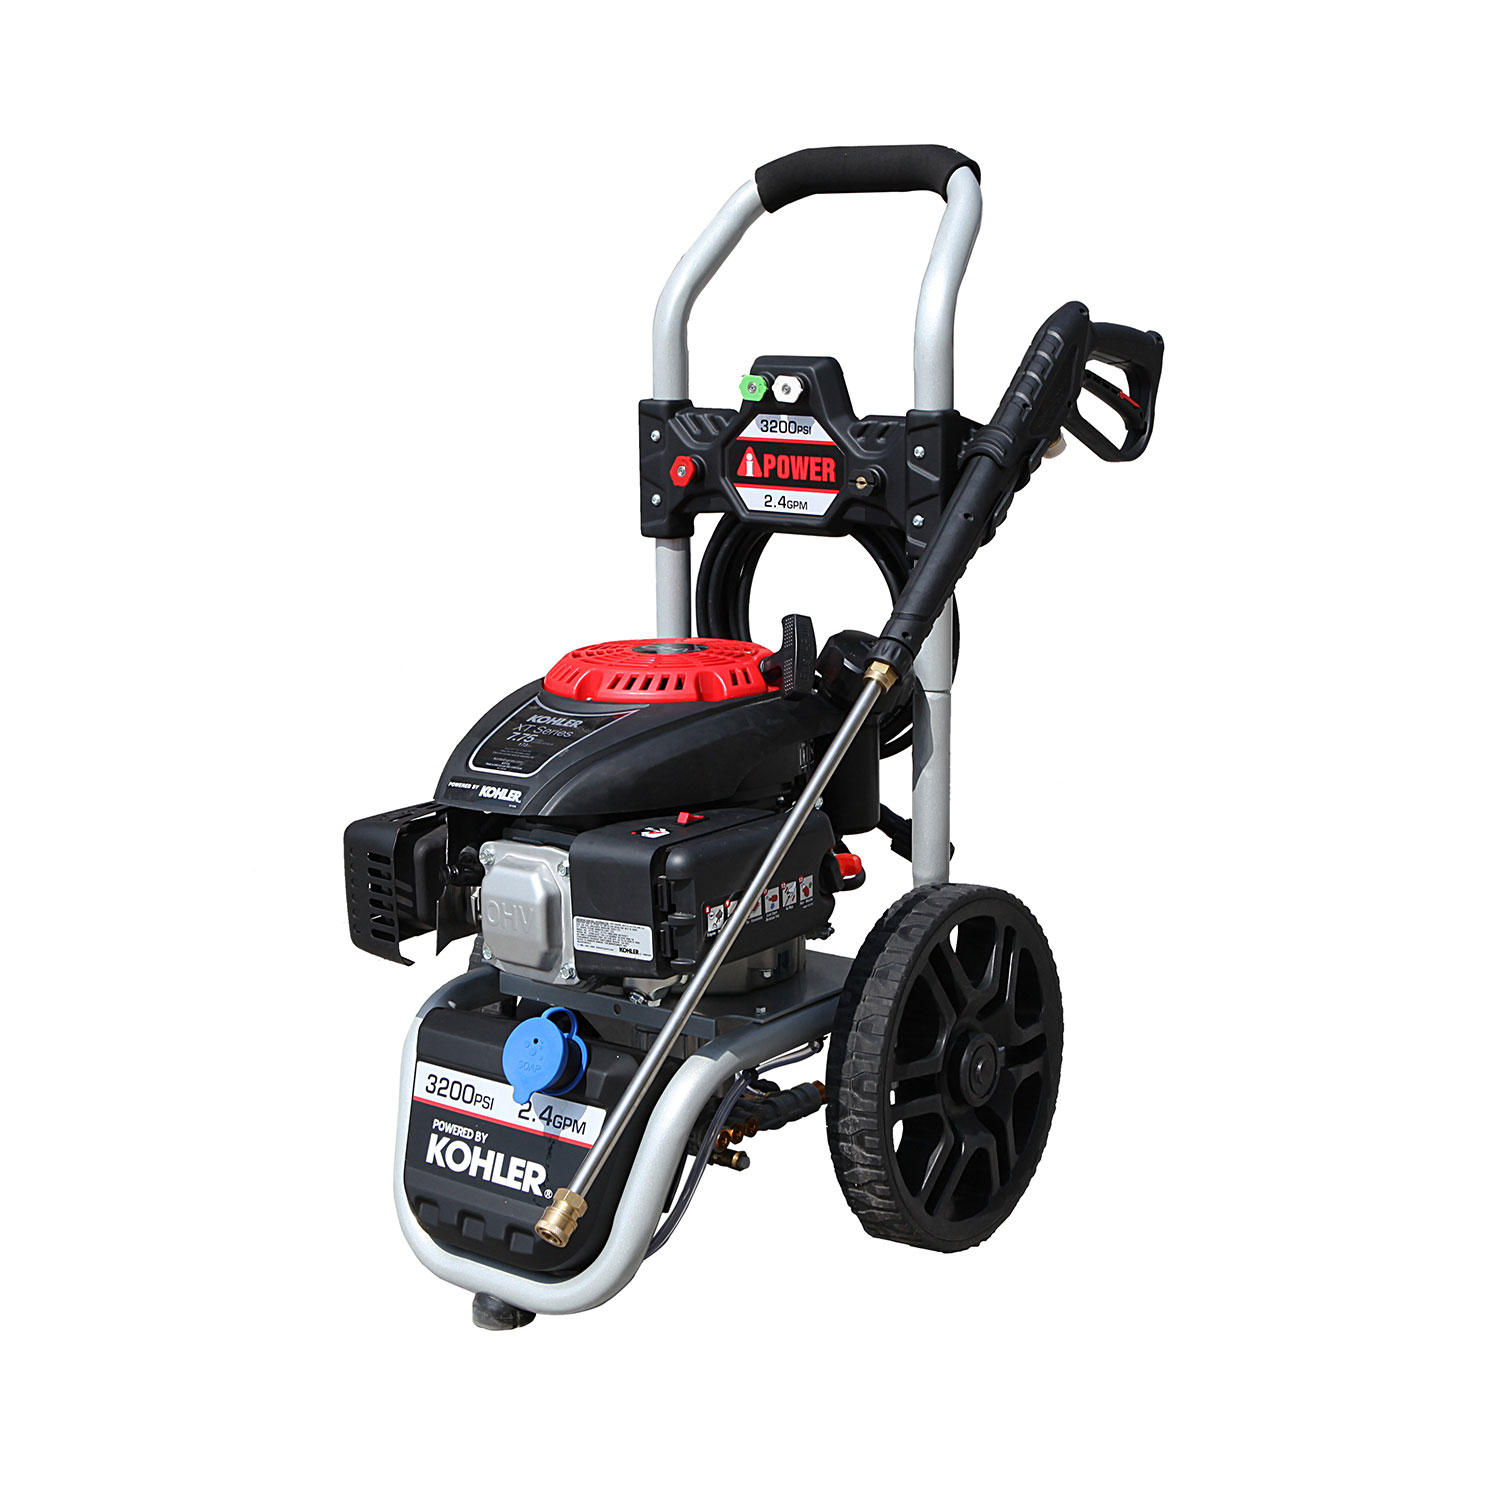 A-iPower AP3200K 3,200 PSI Pressure Washer with 2.4 GPM Kohler 173cc OHV Engine